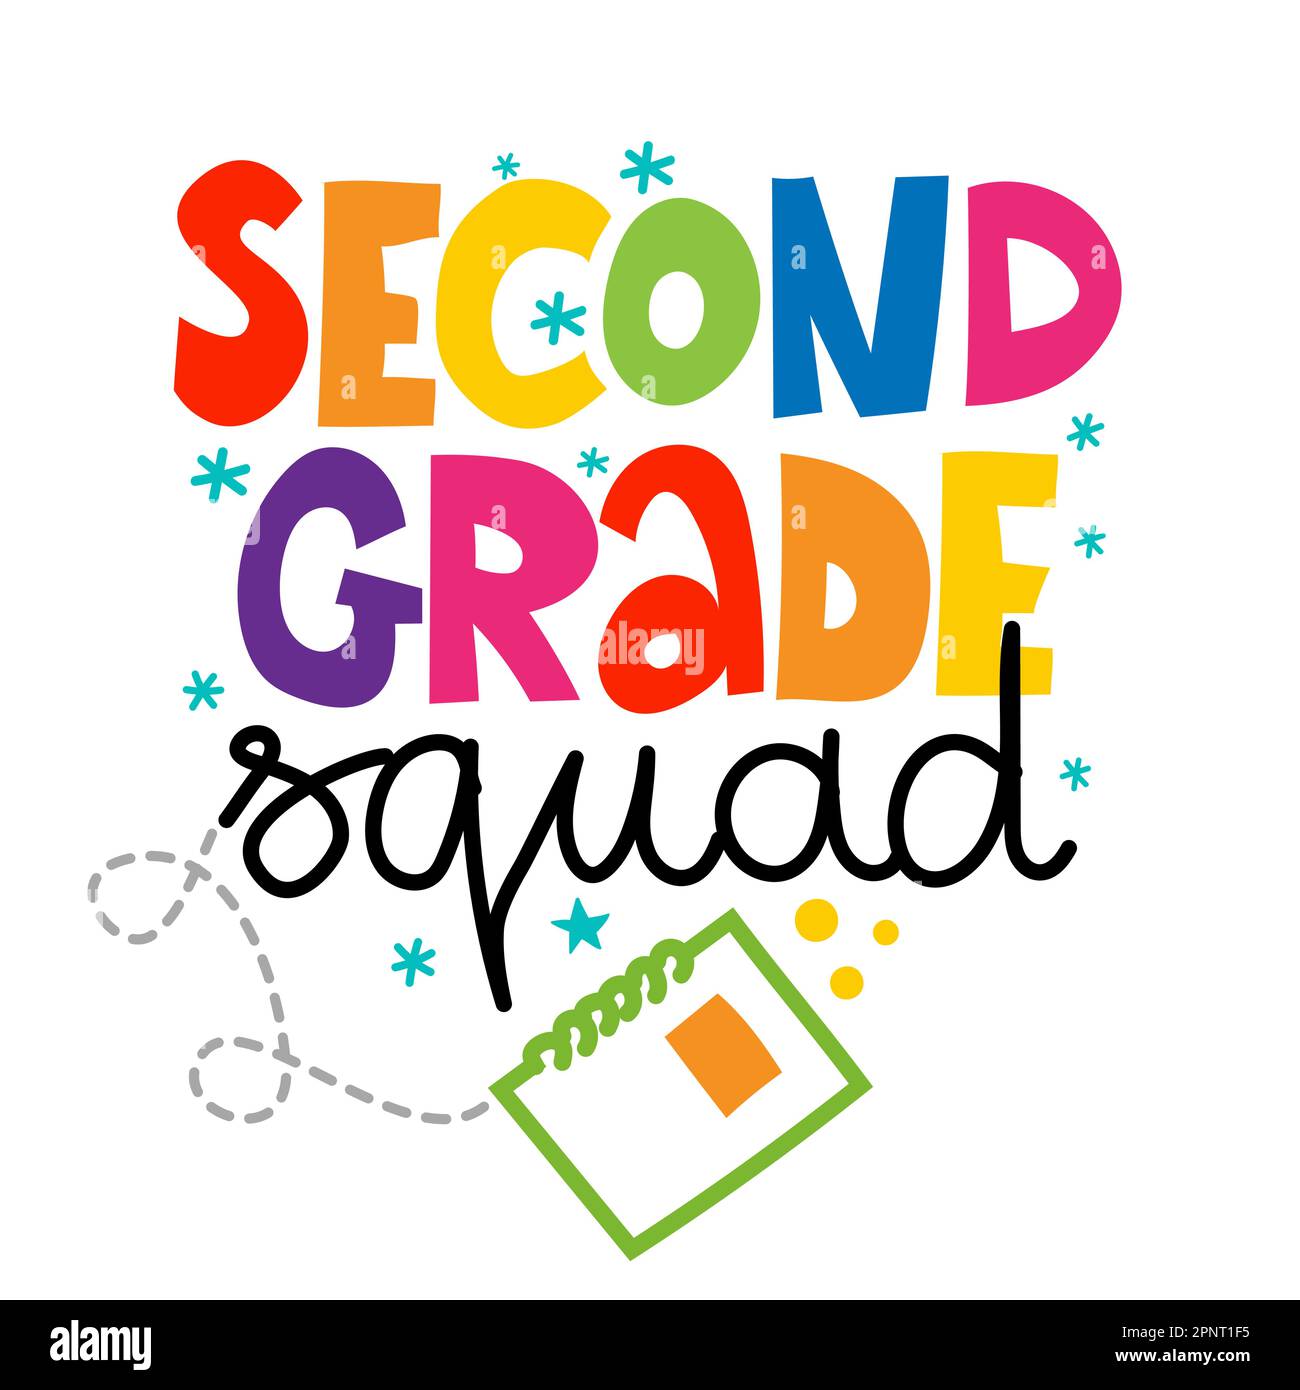 Second grade Squad - colorful typography design. Good for clothes, gift sets, photos or motivation posters. Preschool education T shirt typography des Stock Vector